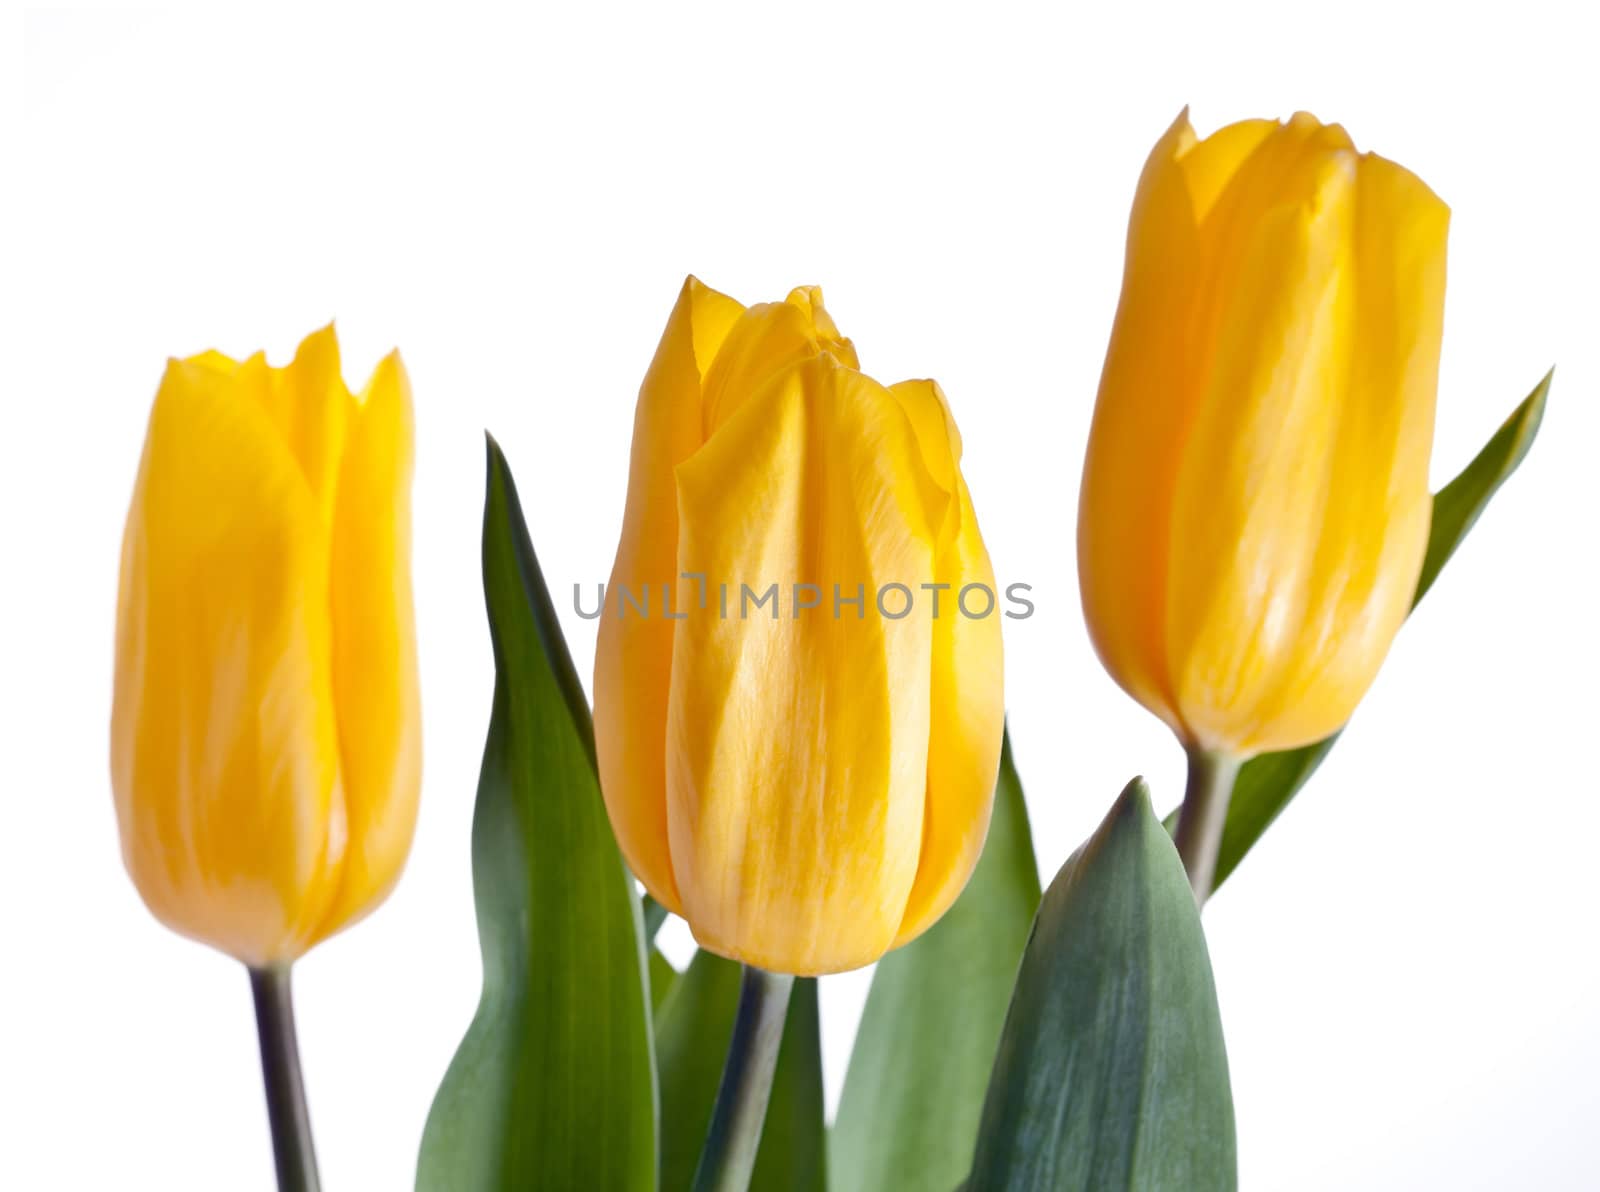 3 yellow tulips on white background. Focus on the central flower